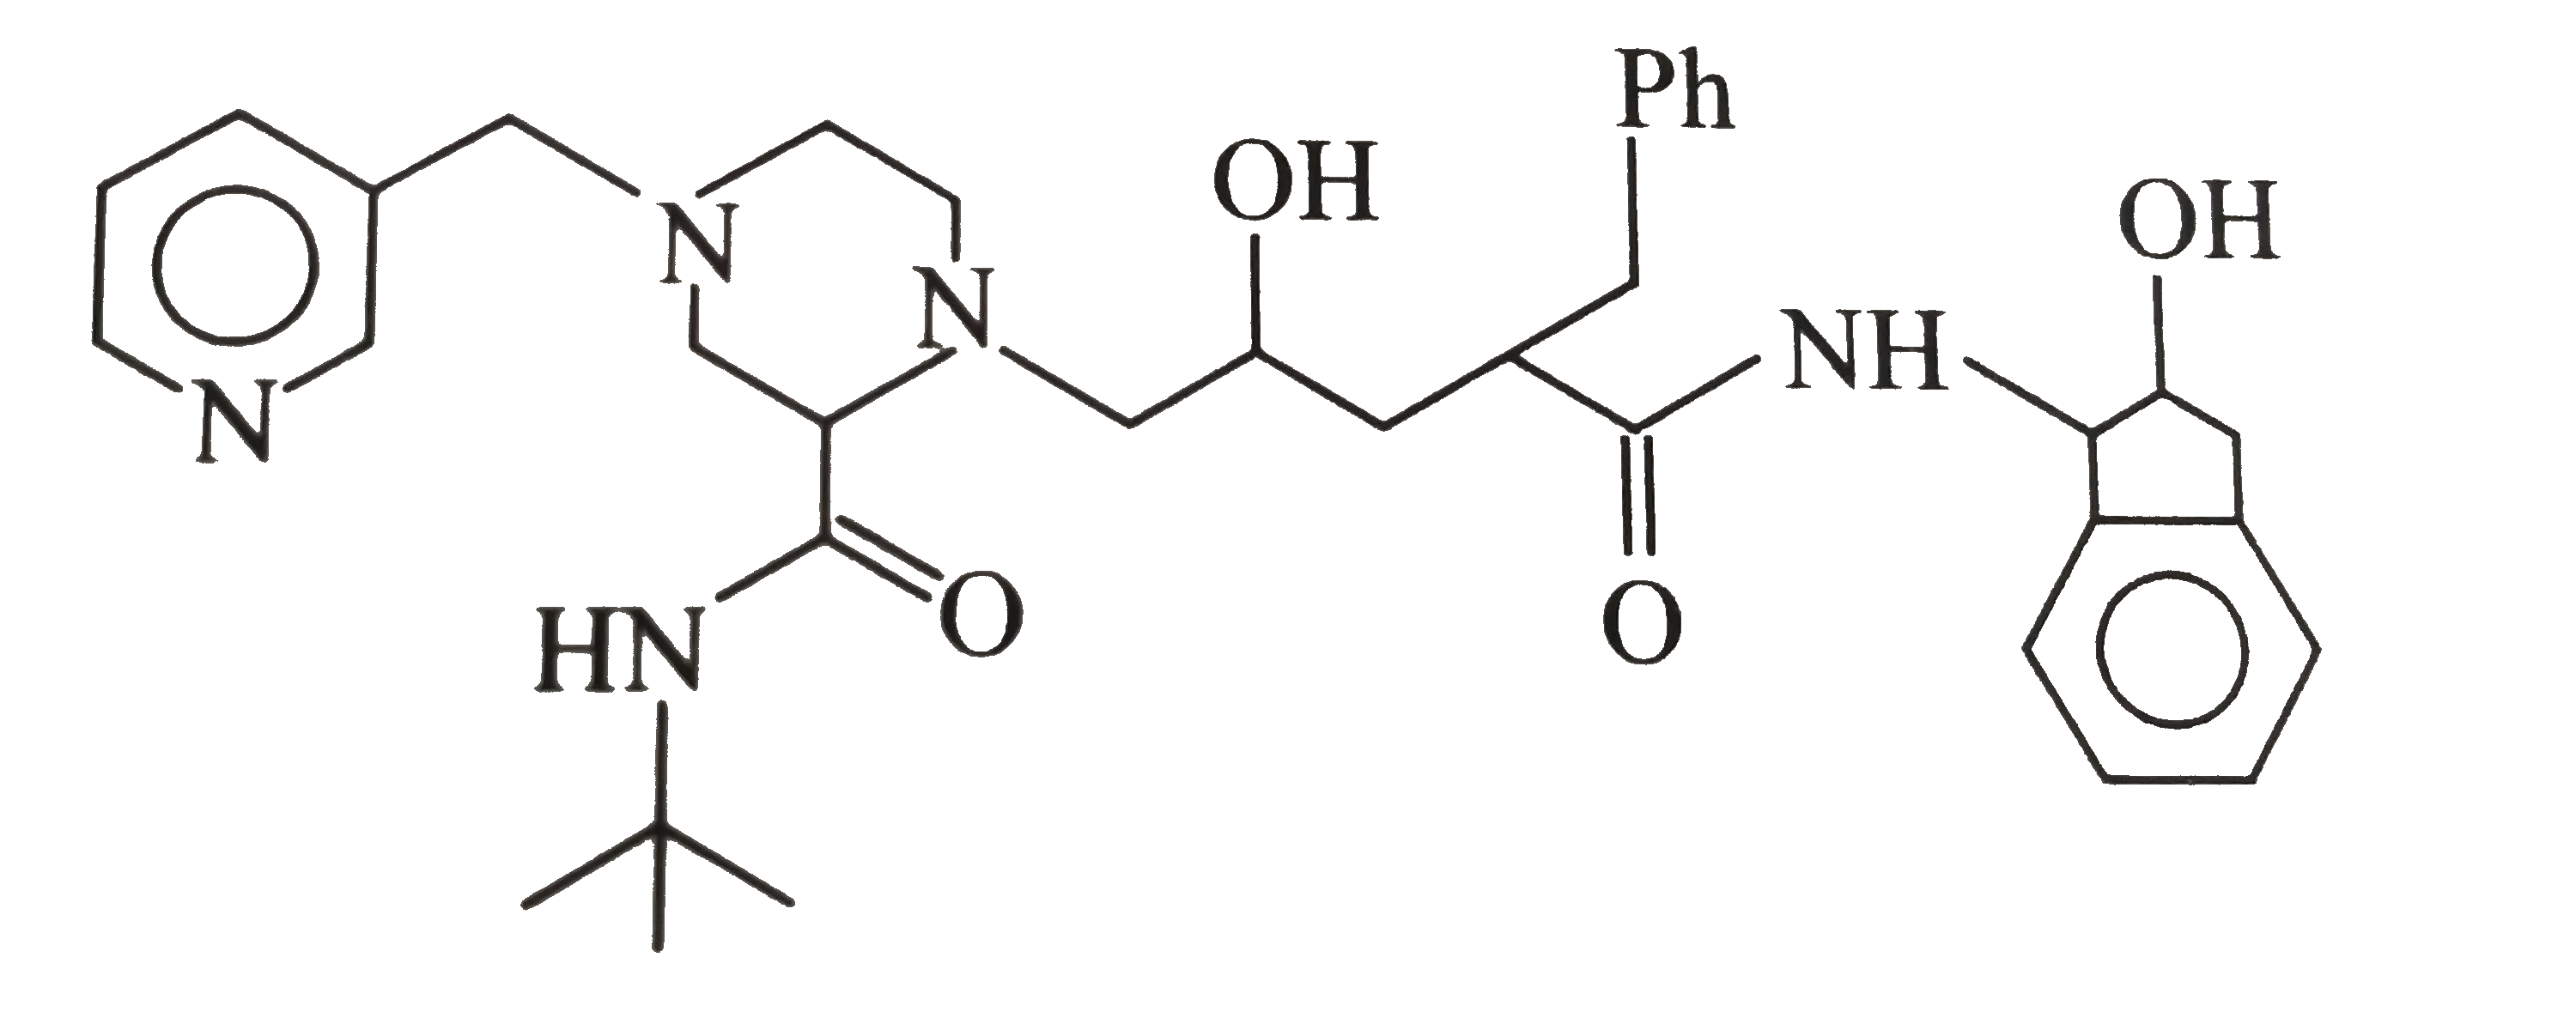 Crixivan, a drug produced by Merck and Co., is widely used in the fight at against AIDS (acquied immune dificiency syndrome). The sturcture of cirxivan is given below:       How many 3^(@) amine groups are present in the compound?